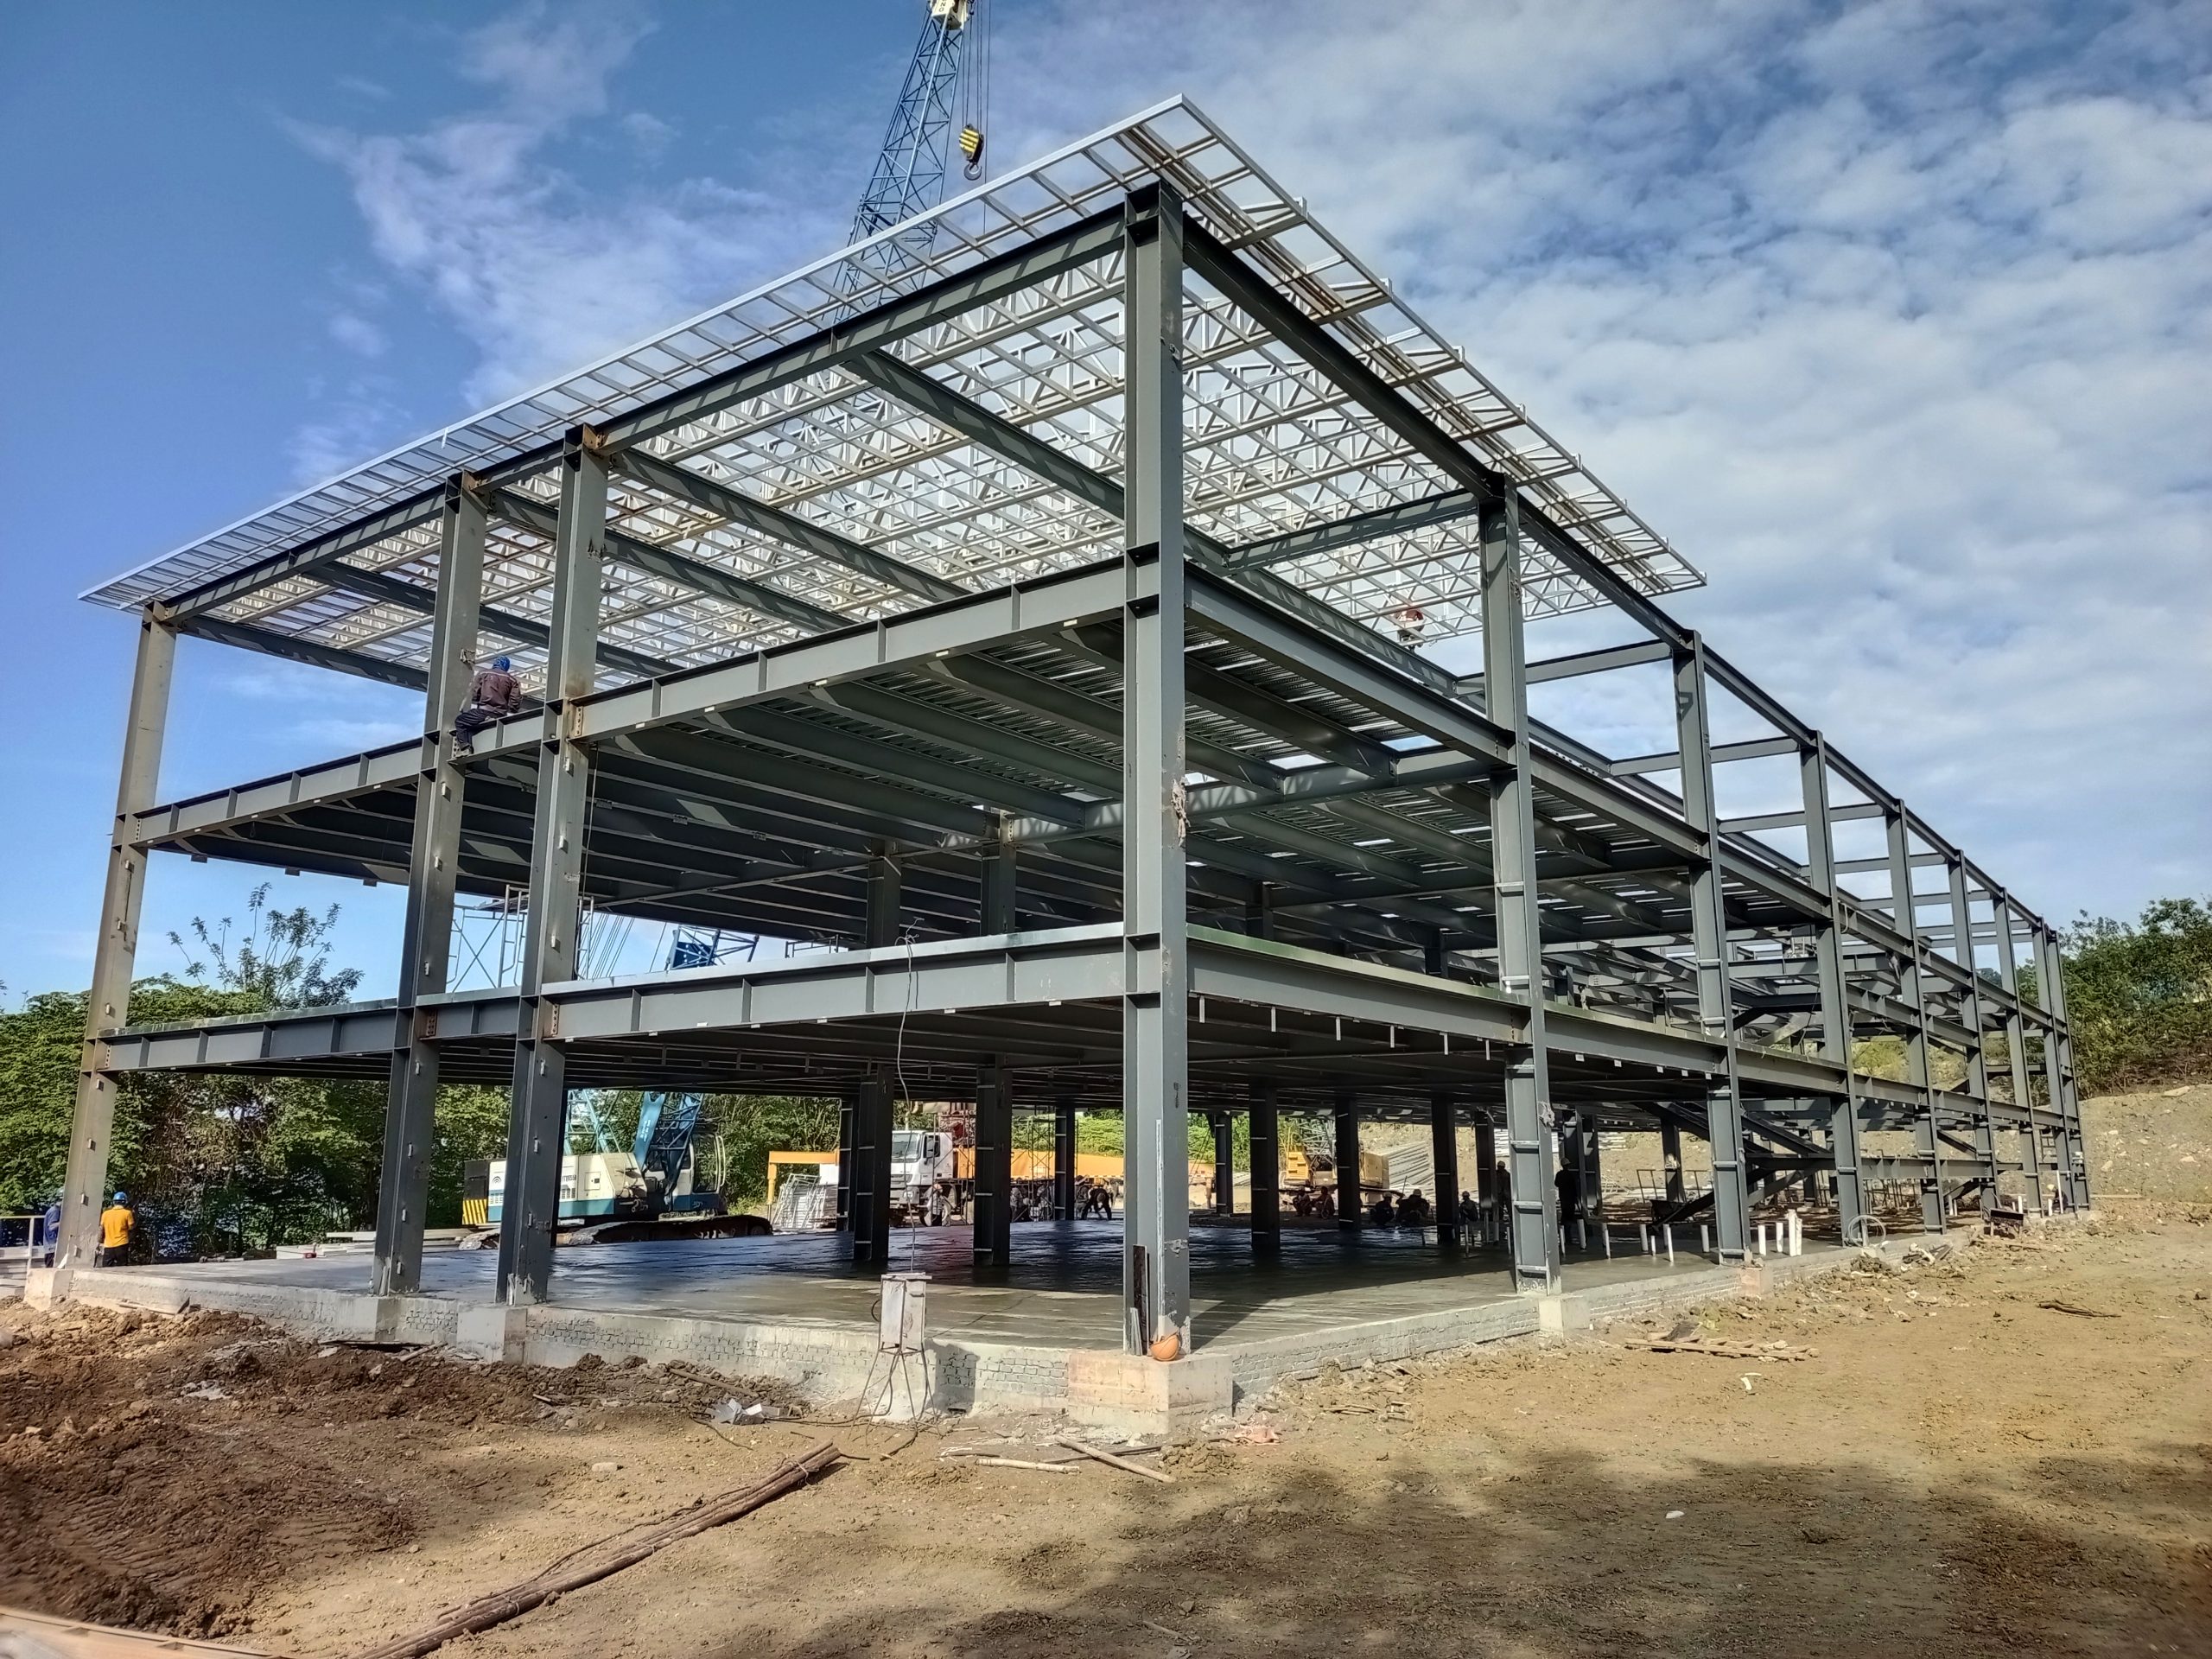 Fire Marshals Conduct Large Scale Tests on Several Structural Steel Panel Systems Manufactured by Lida Group to Evaluate Performance in Full Building Fires